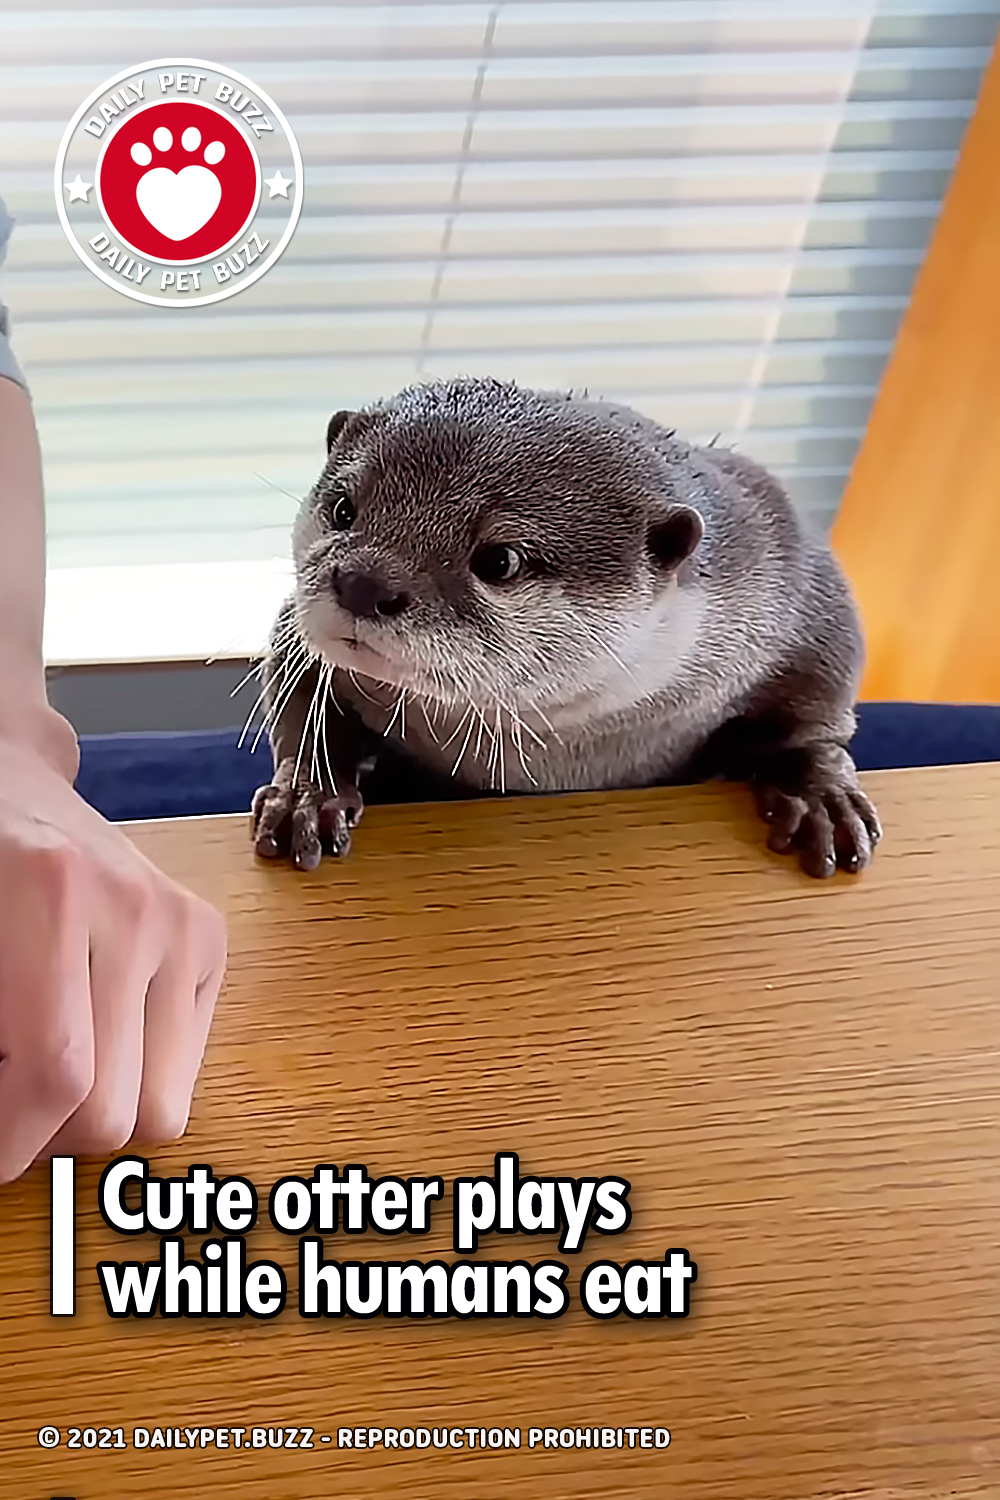 Cute otter plays while humans eat